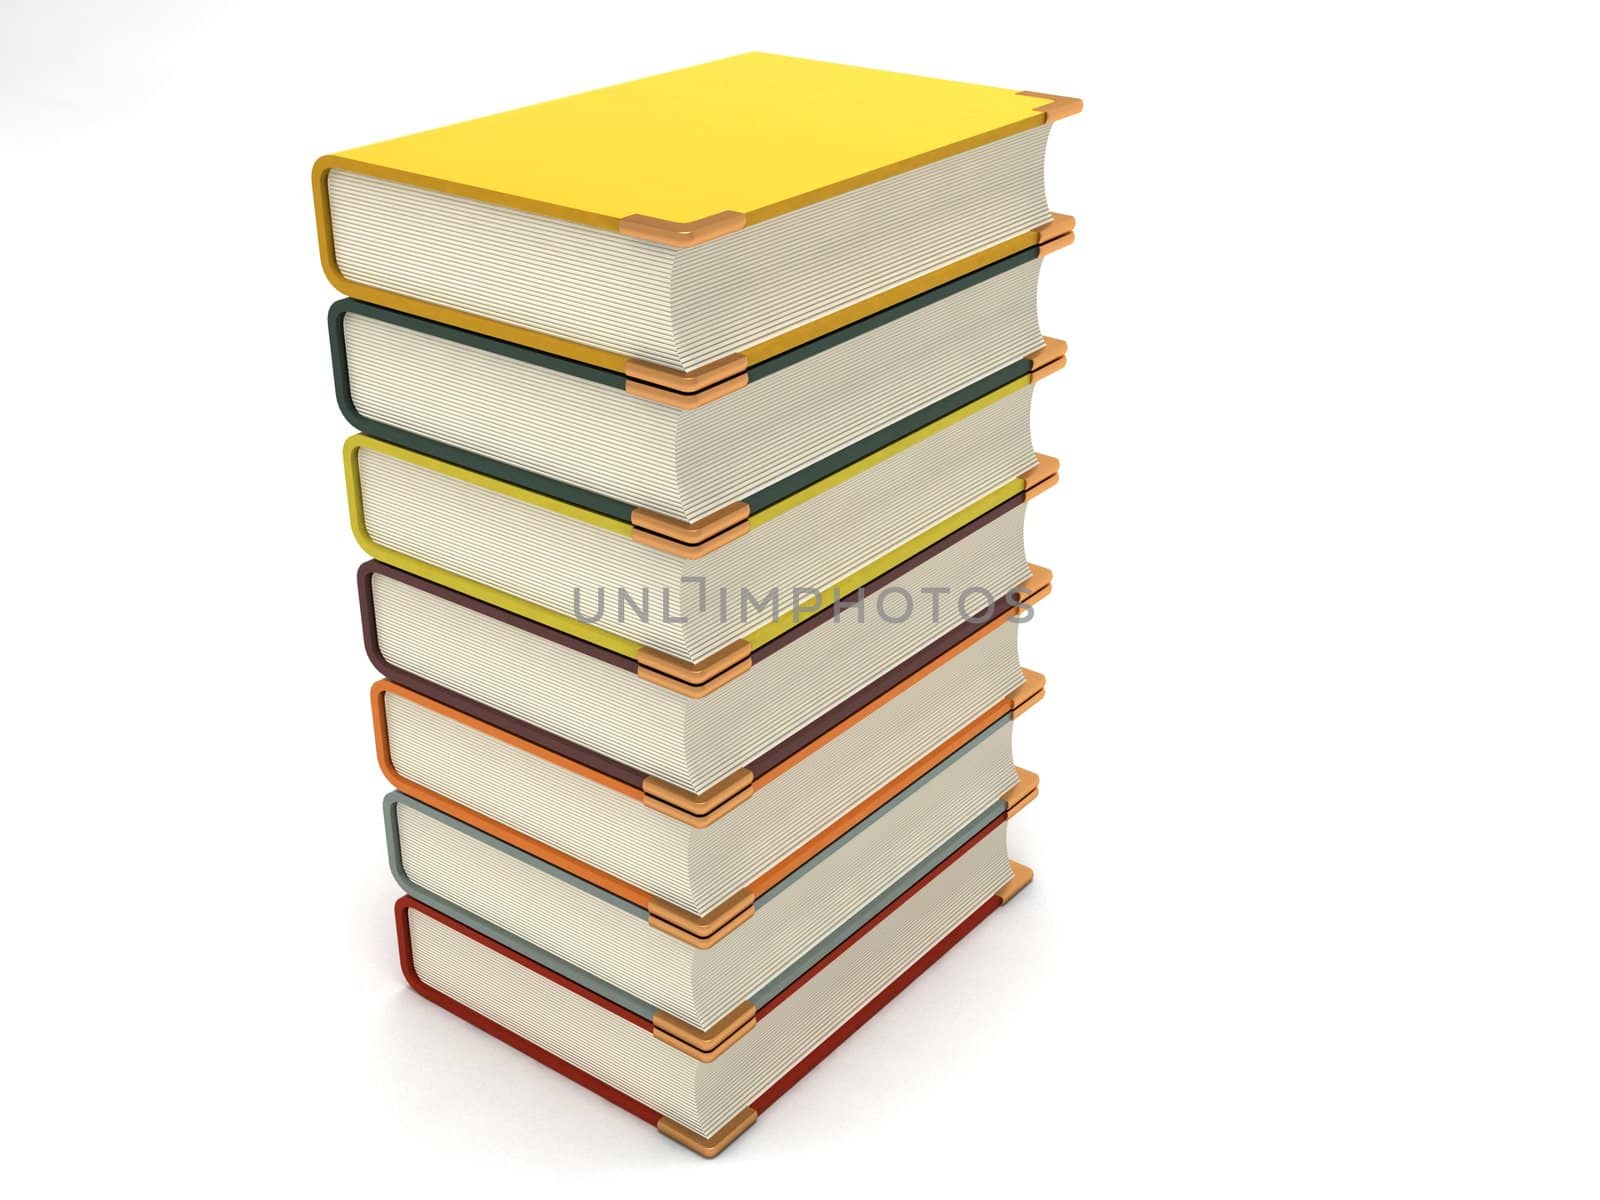 three dimensional stack of books against white background